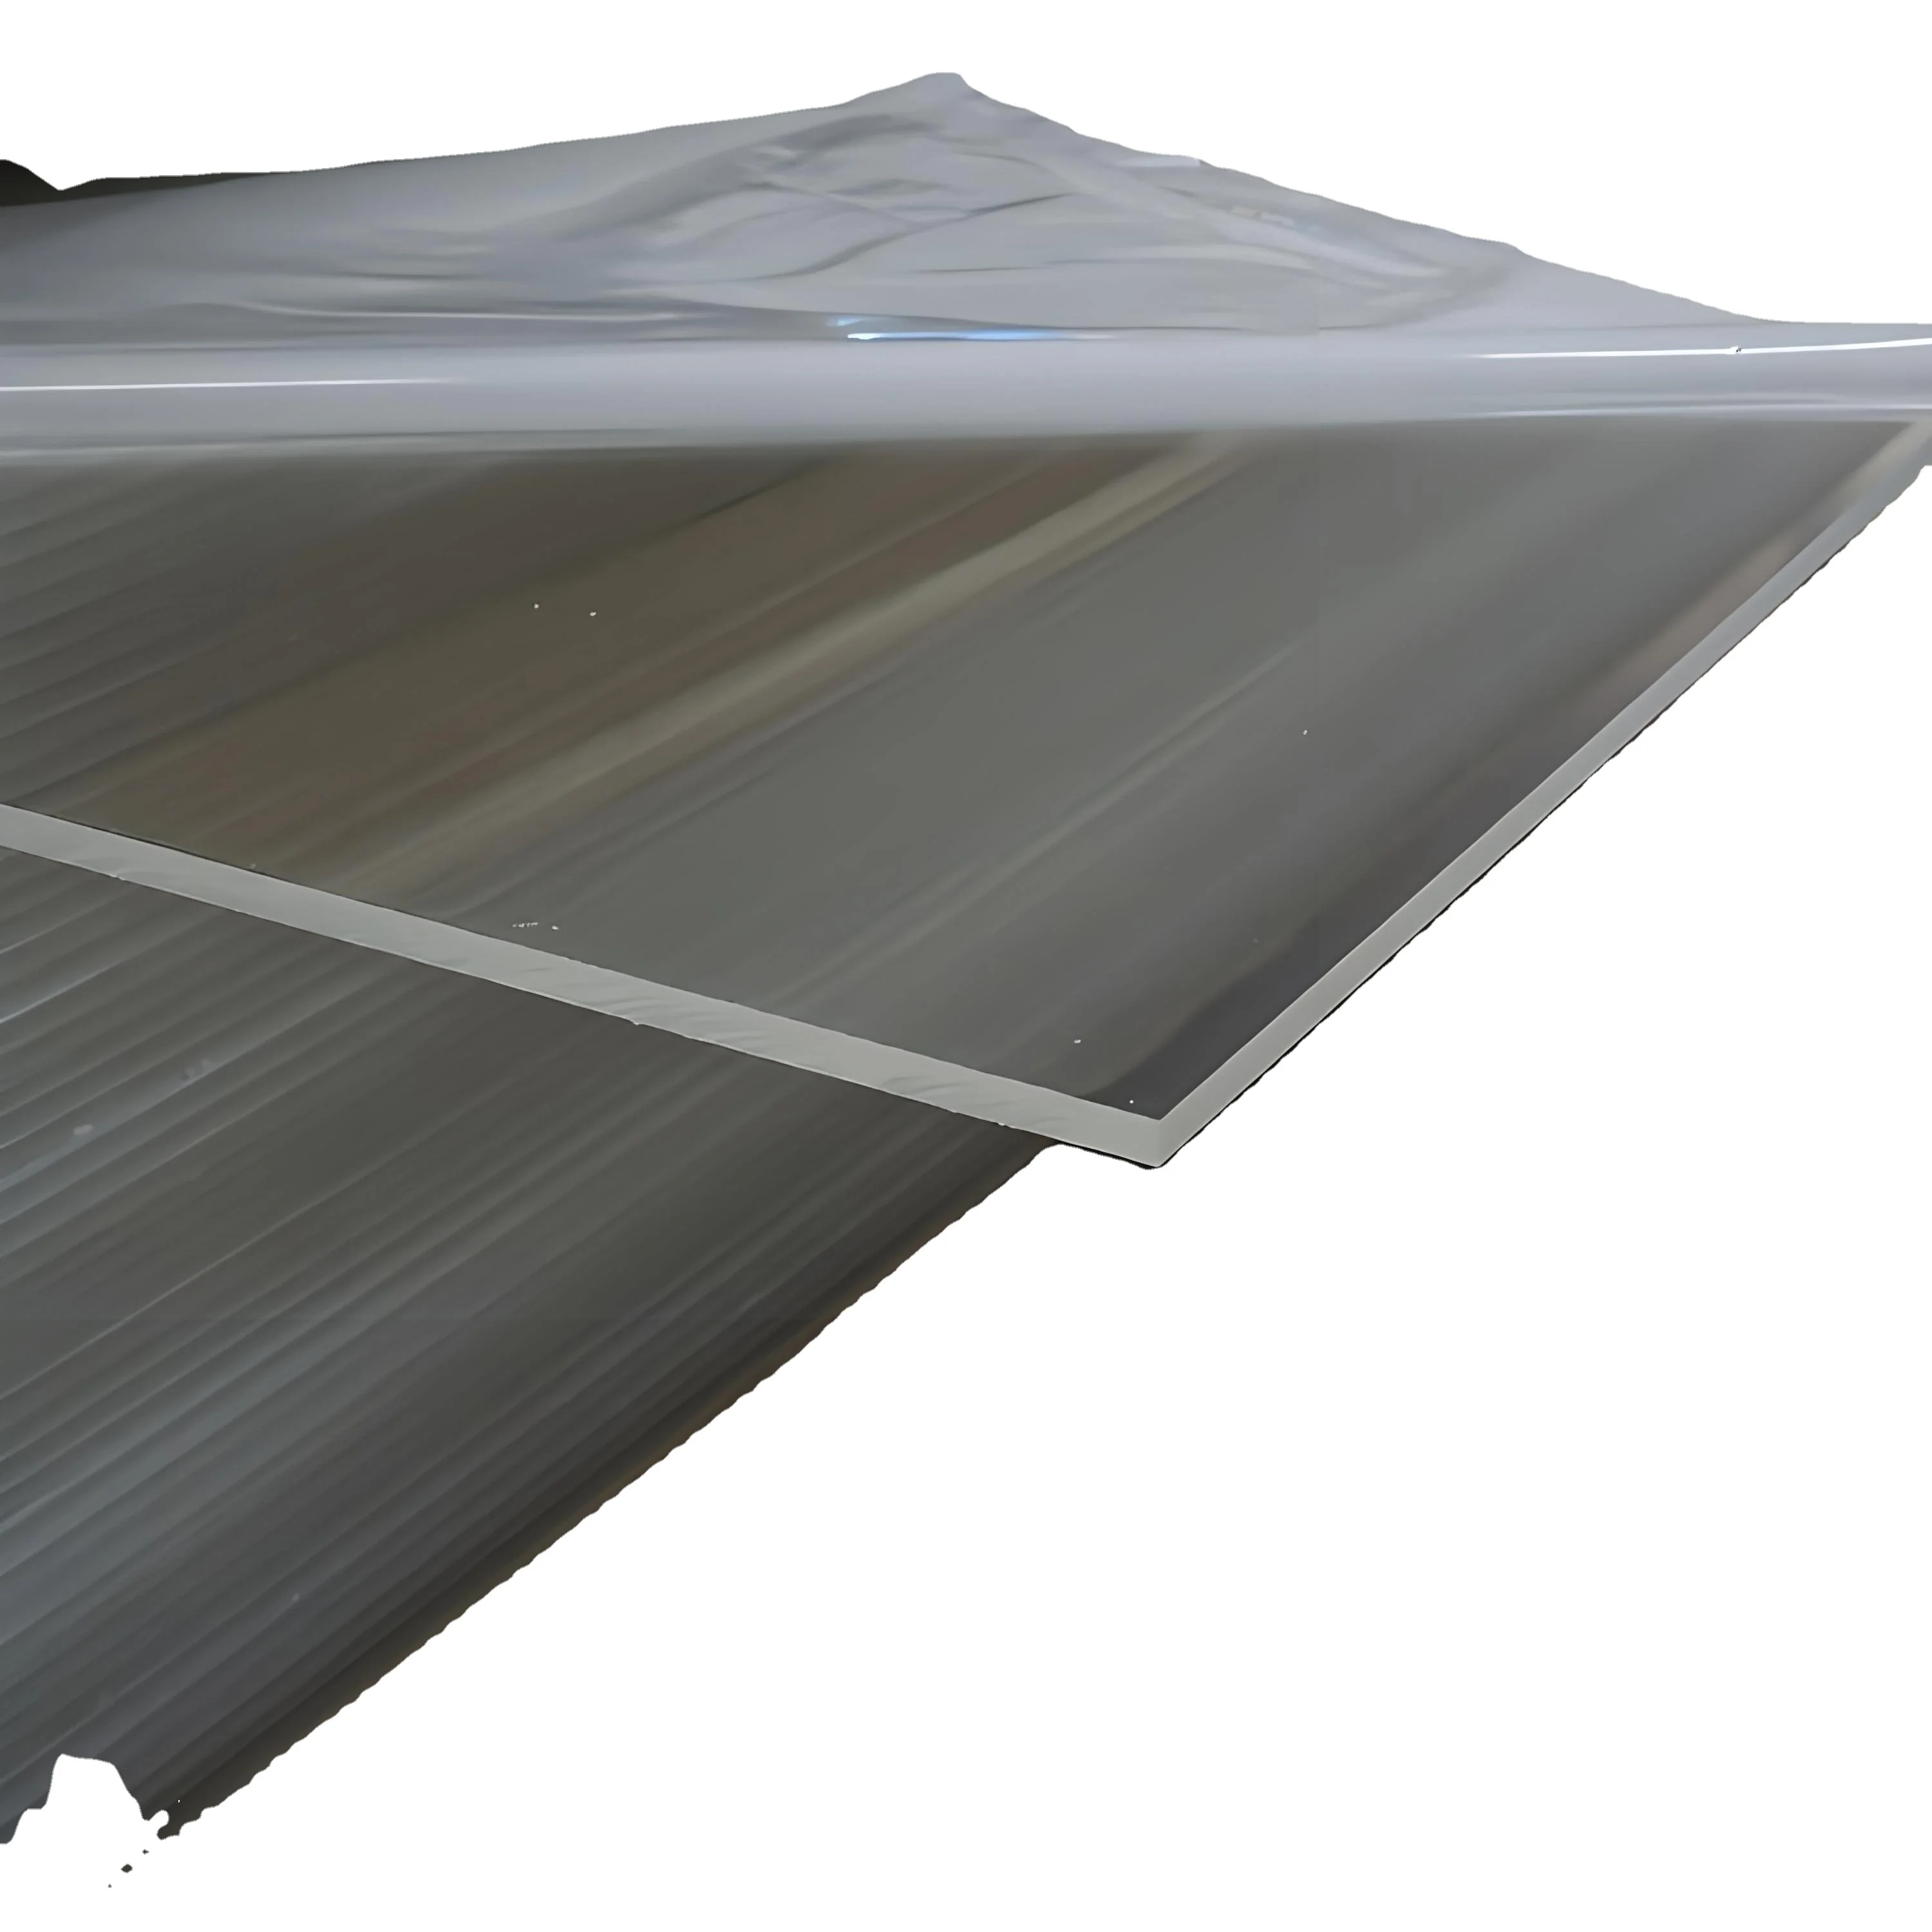 Weatherable Impact Resistant Hardcoating Polycarbonate Sheets for Exterior Architectural Aerospace Automotive Applications